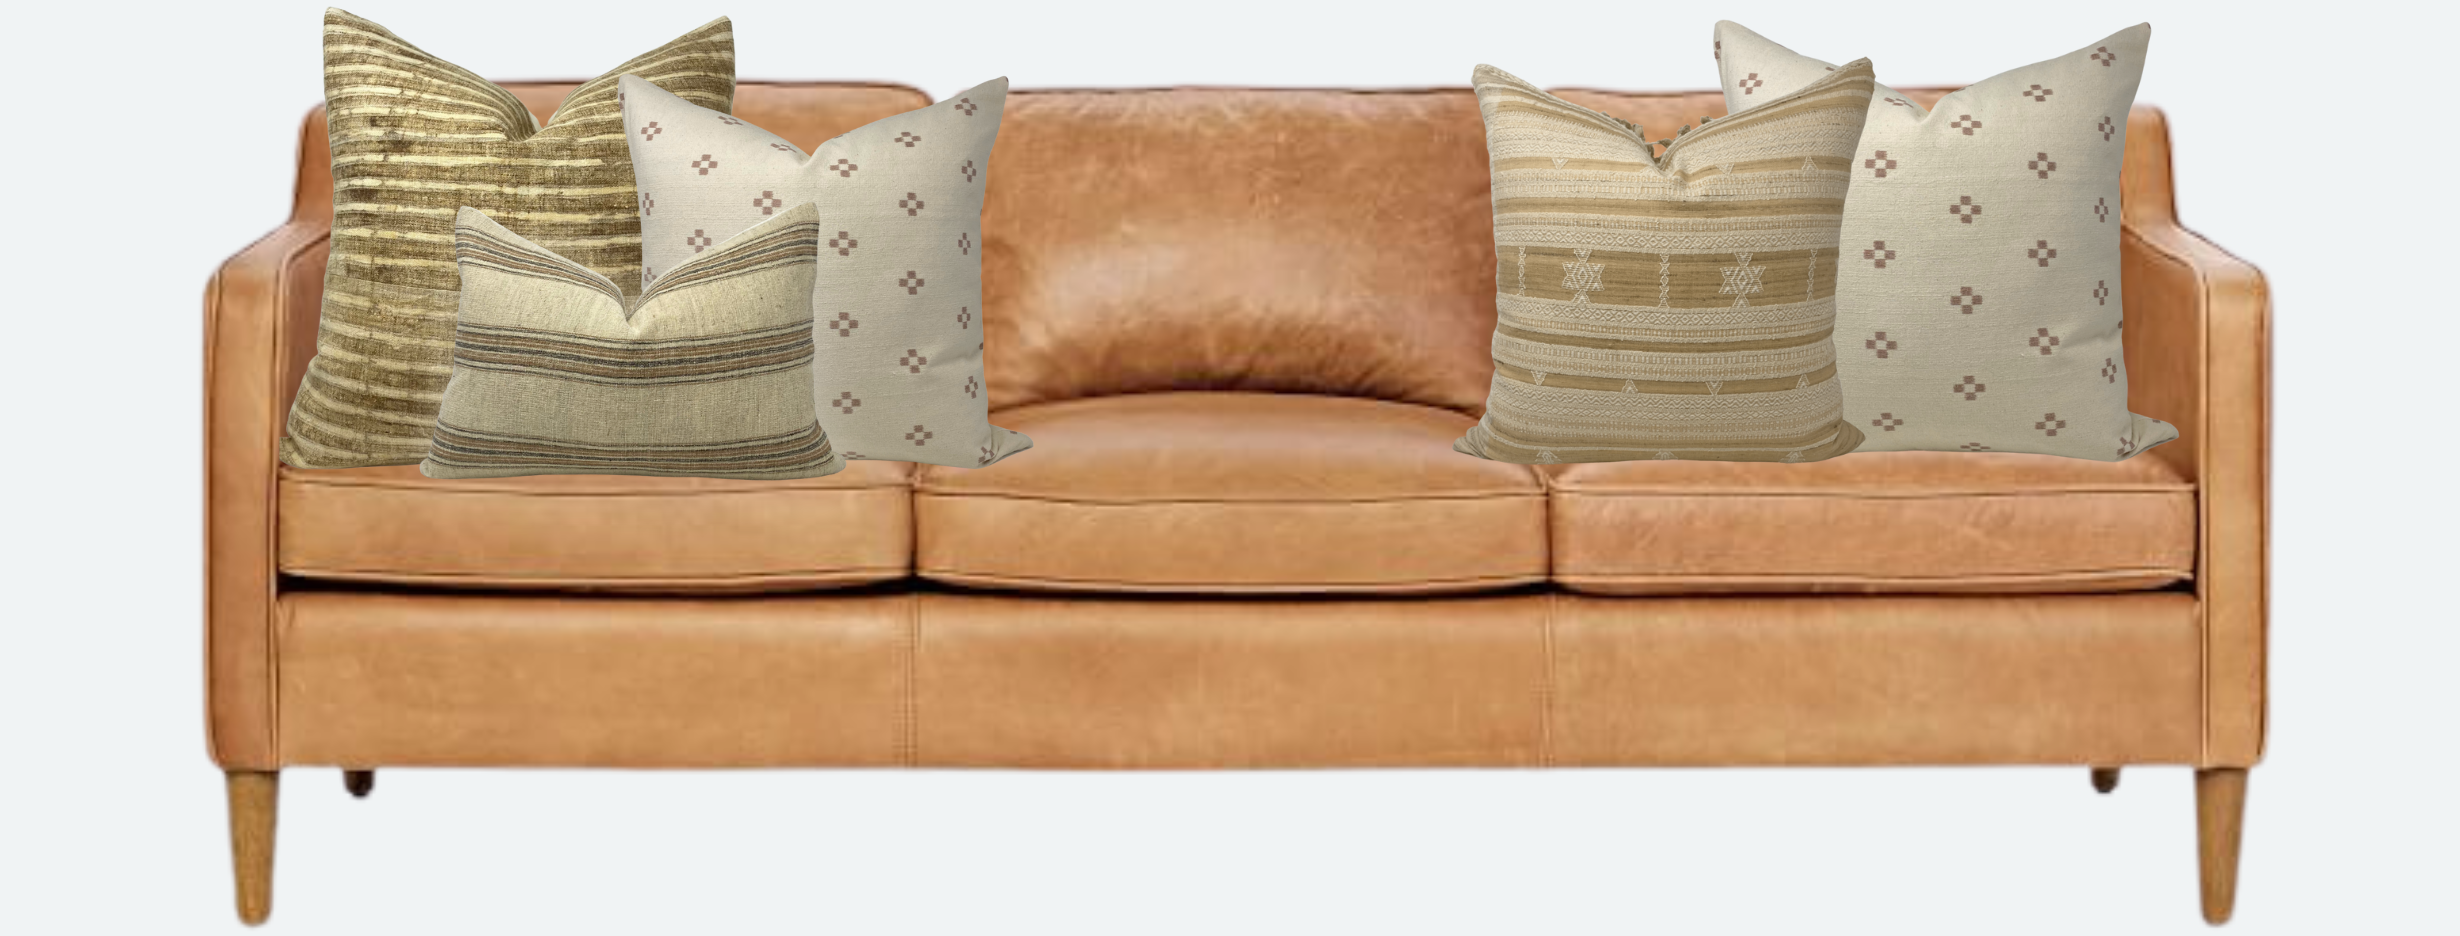 https://cdn.shopify.com/s/files/1/0052/8780/5039/files/Everand_Beige_tones_camel_leather_couch.png?v=1661447420